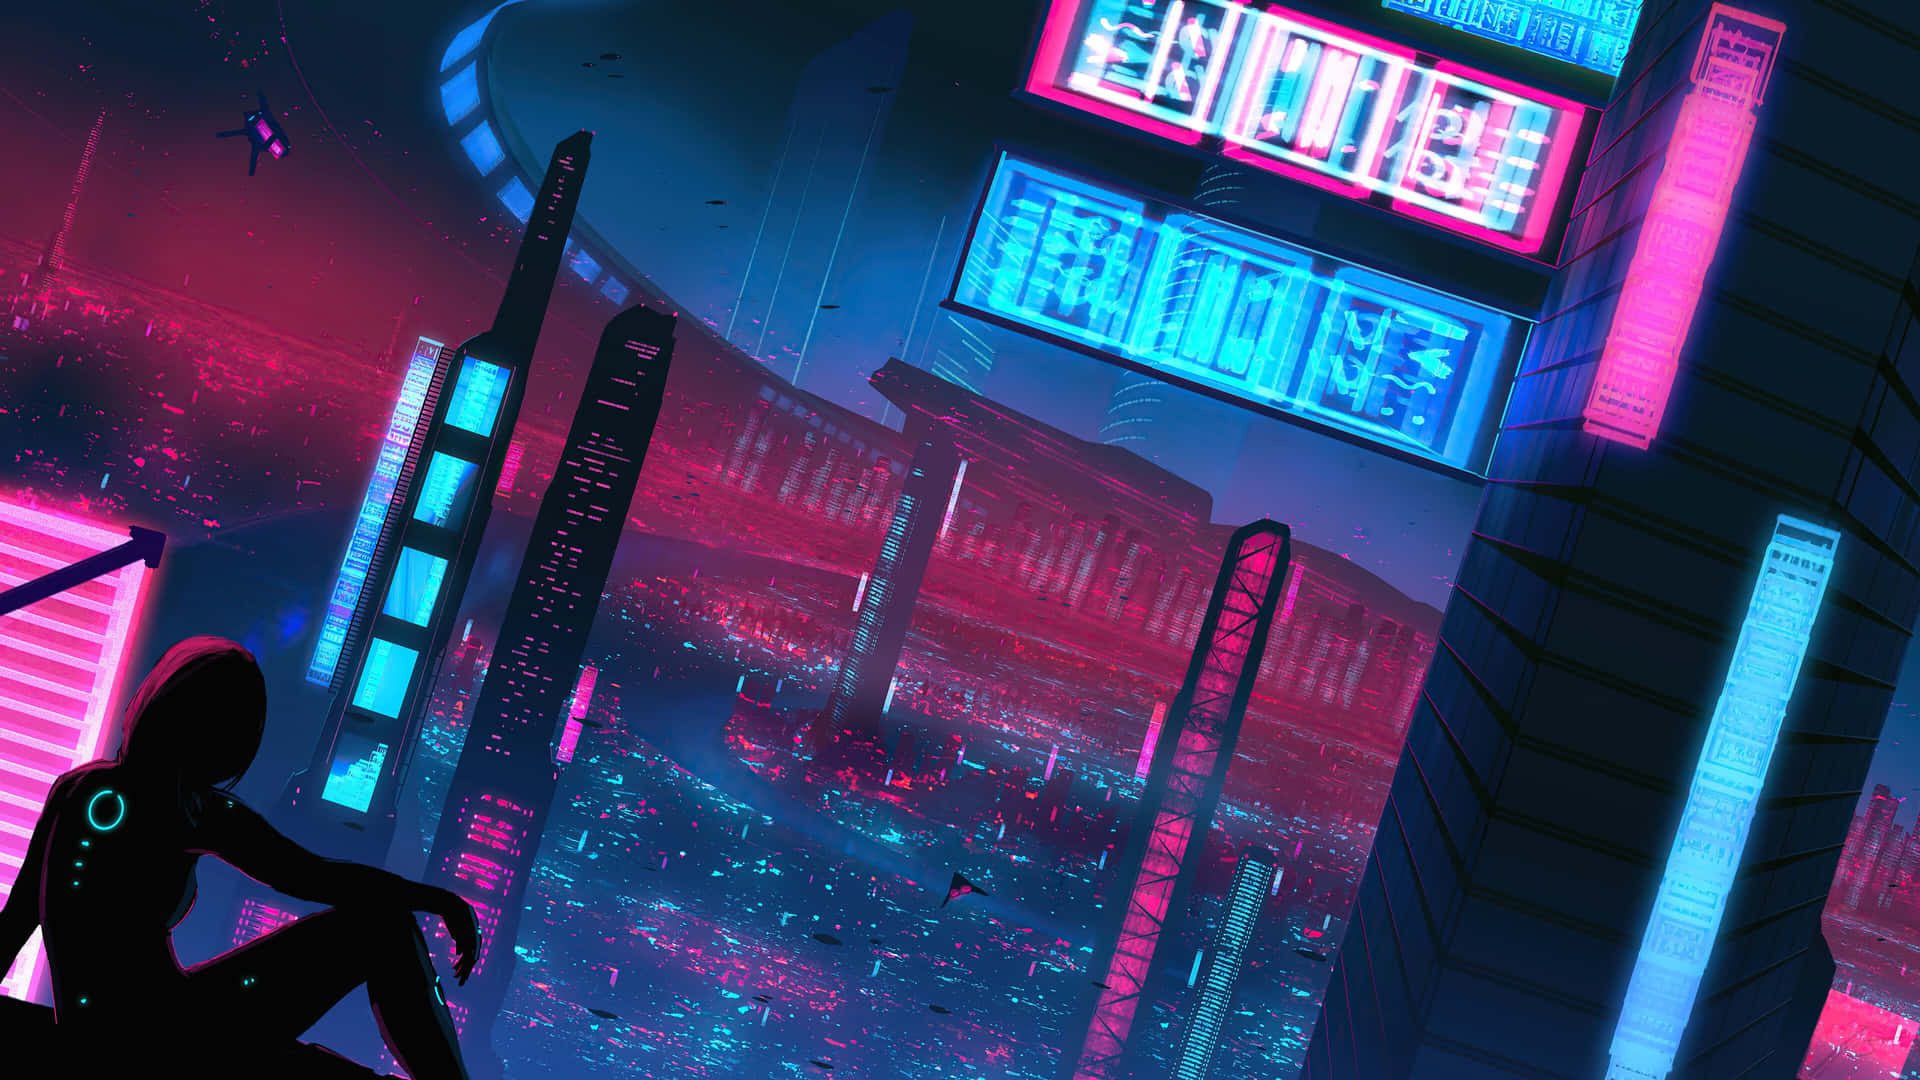 The Colourful Neon Lights of Cyberpunk